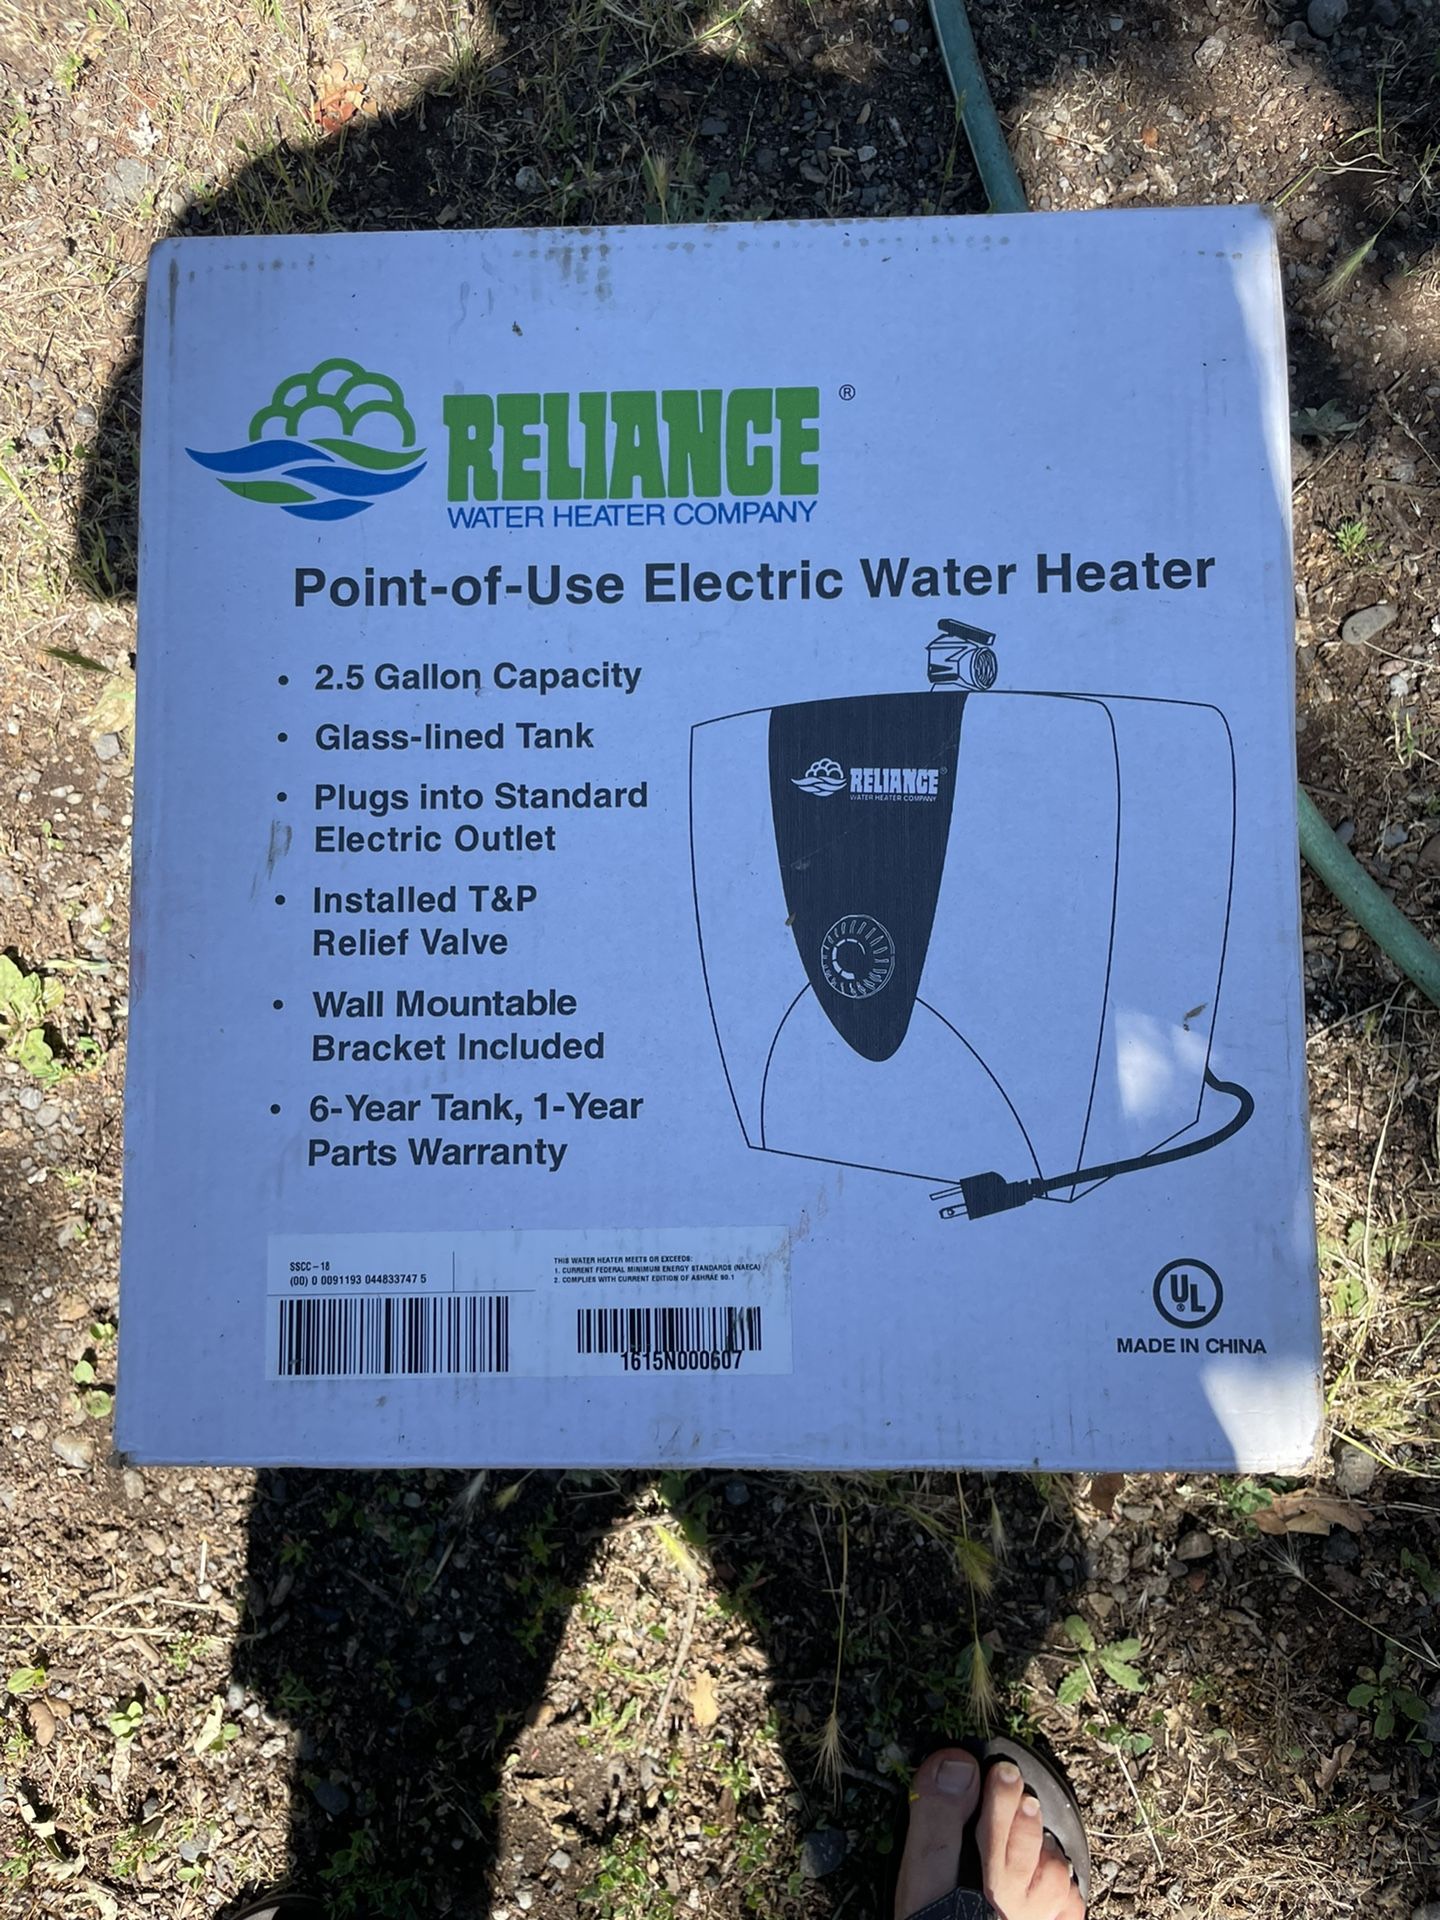 Point-of-use Electric Water Heater